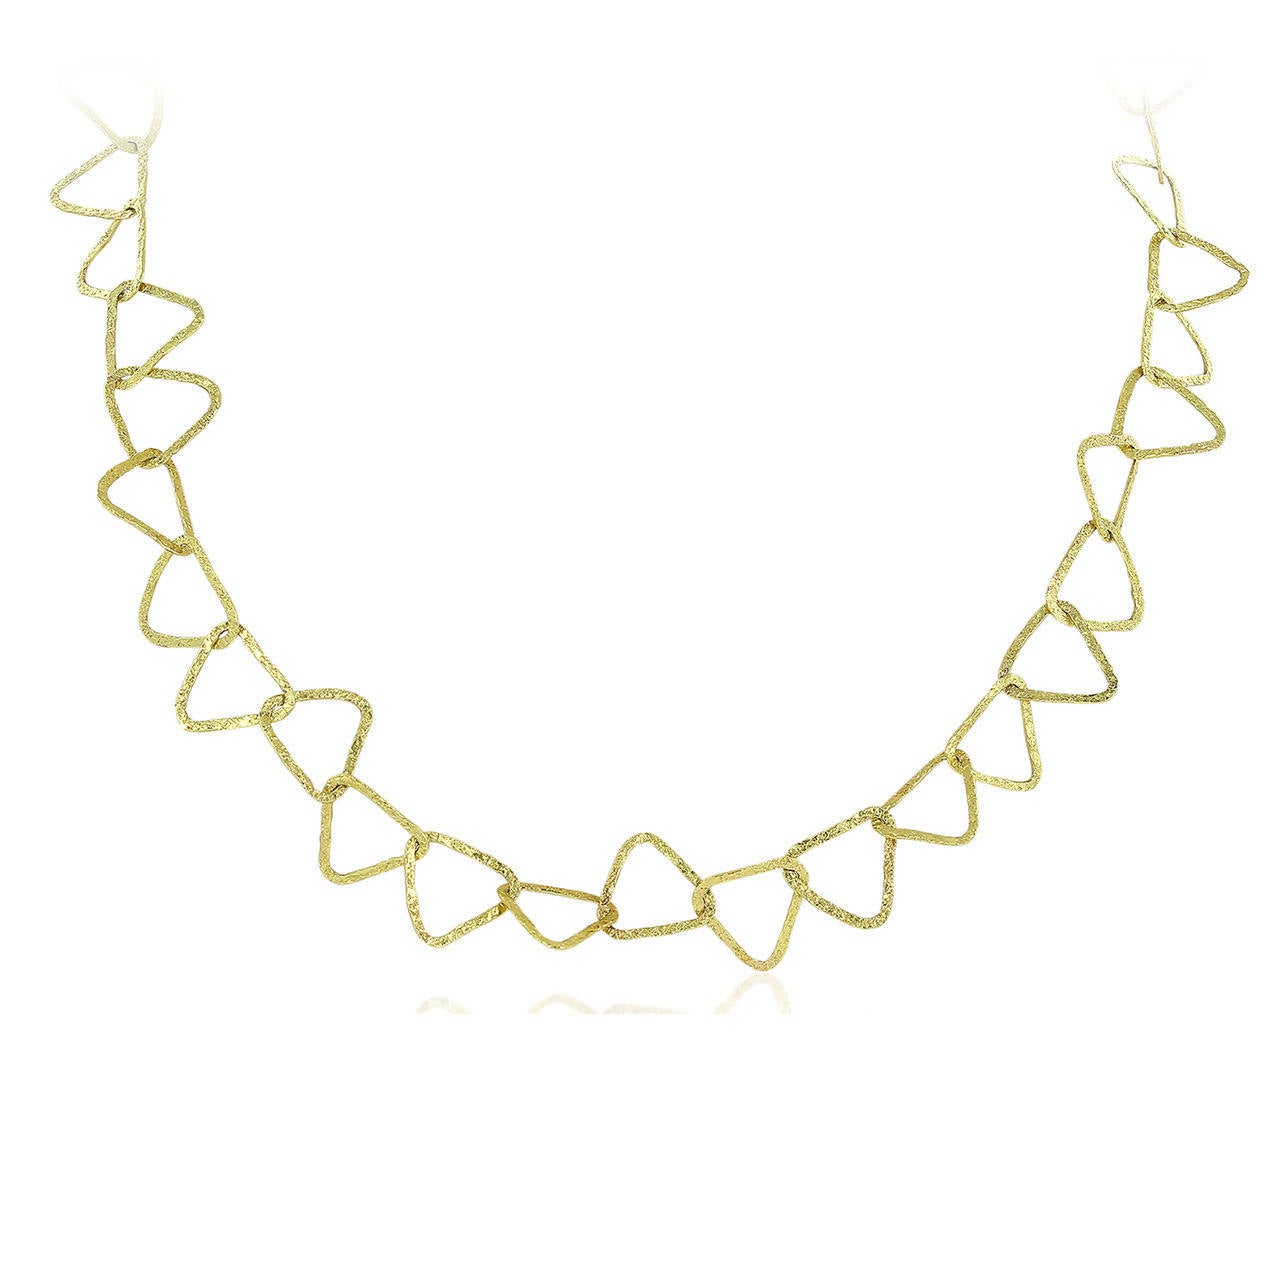 Penko Textured Gold Link Necklace